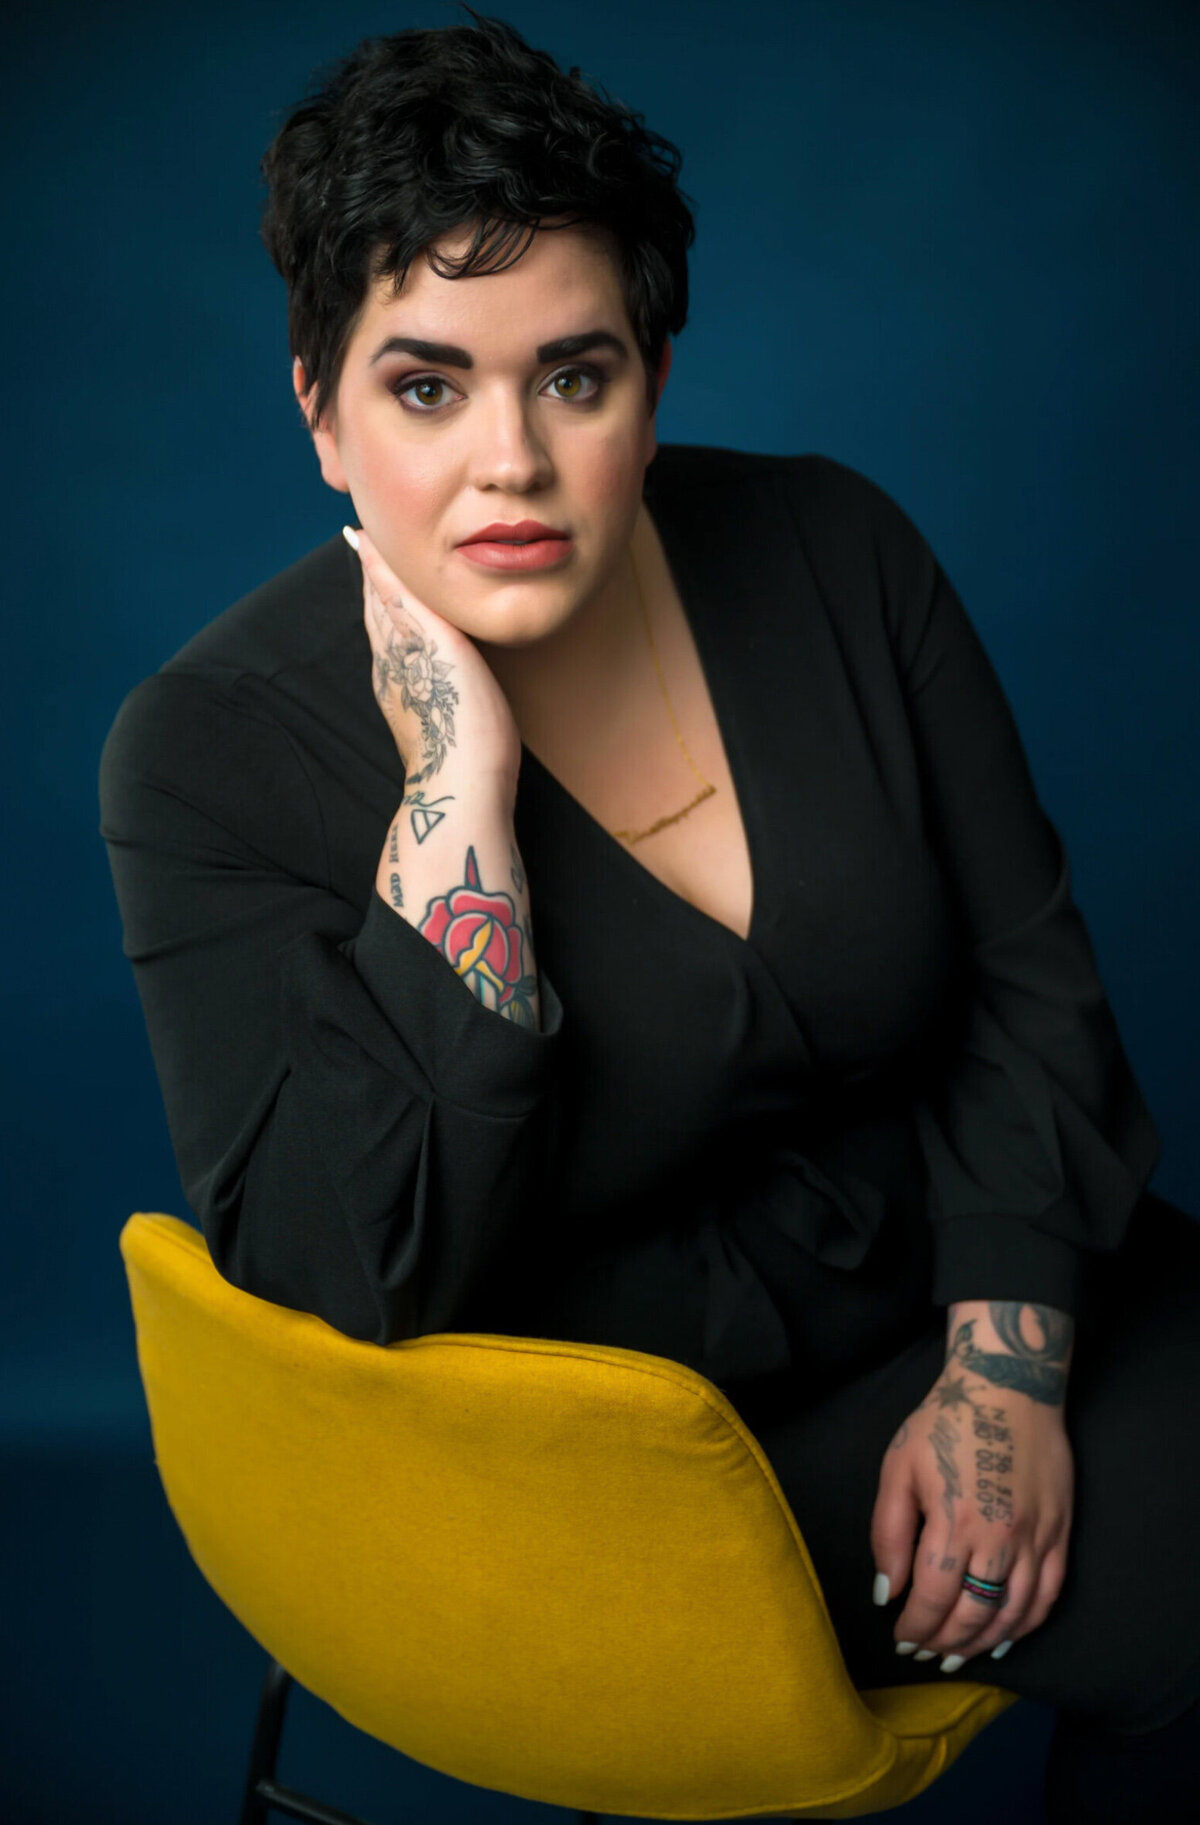 Woman wearing a black shirt sitting on a yellow chair on a blue backdrop, posing for a professional headshot